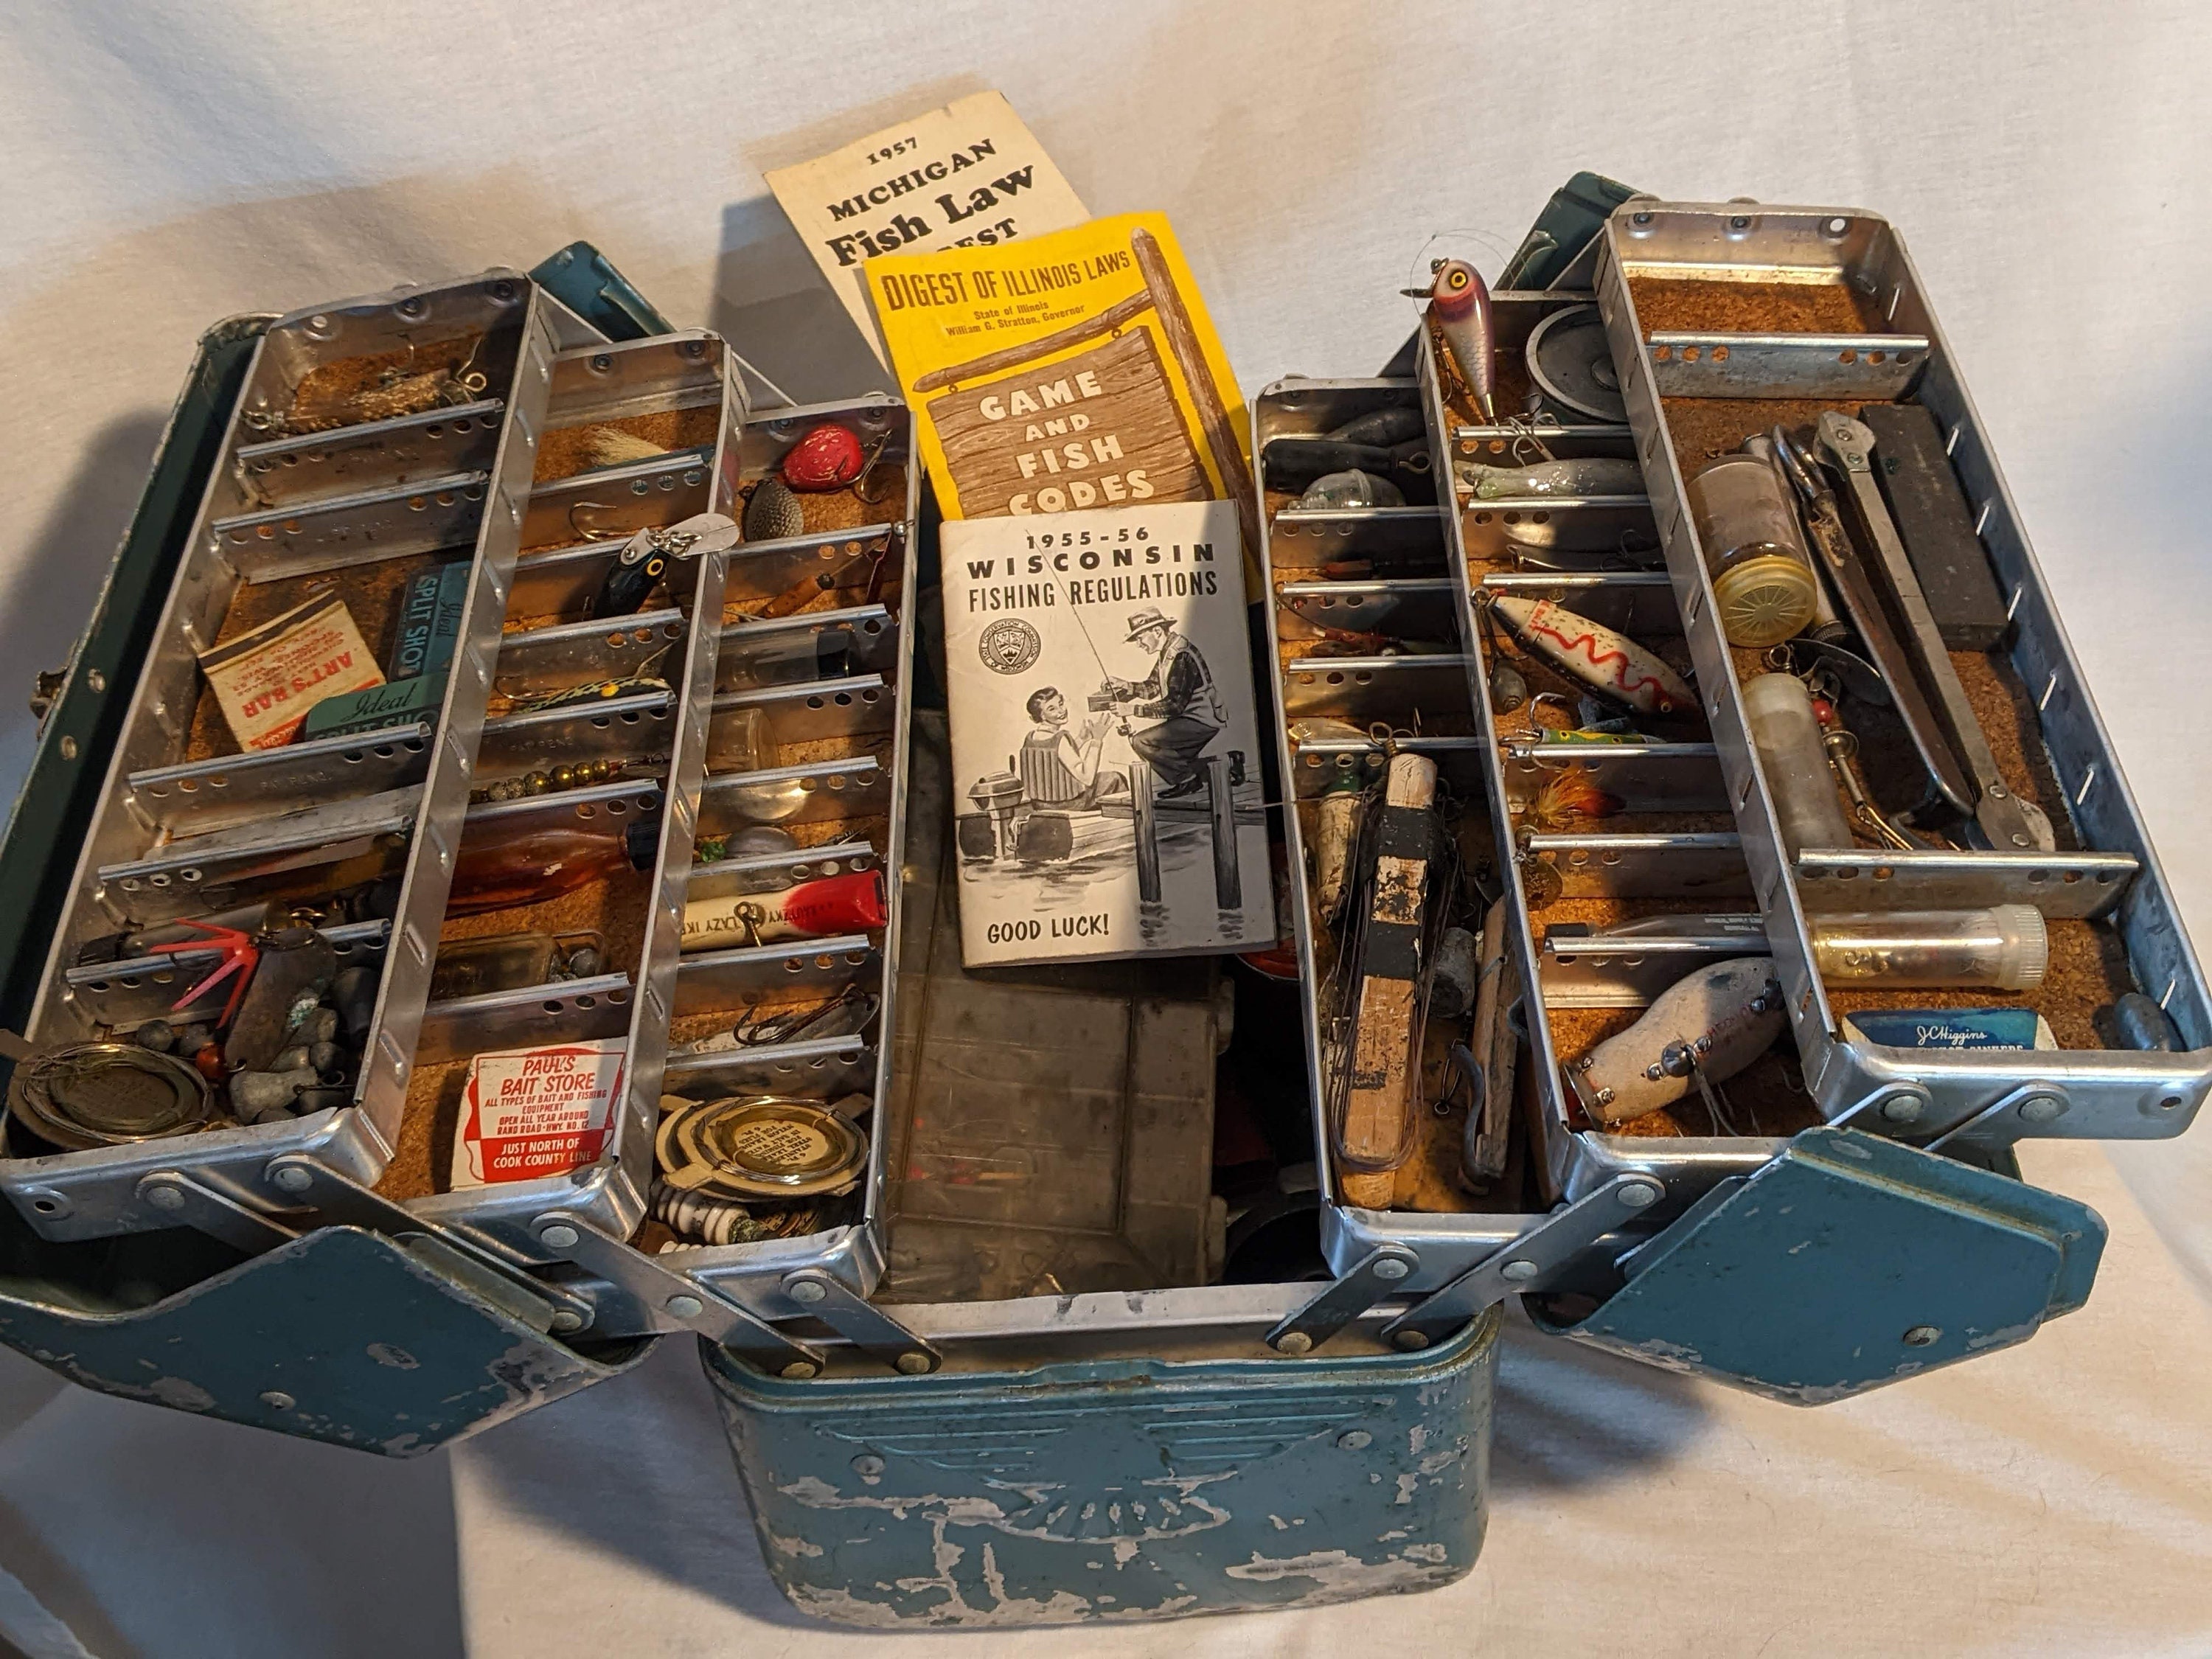 Vintage Tackle Box Full of Lures and Miscellaneous Items From 1956-1957 